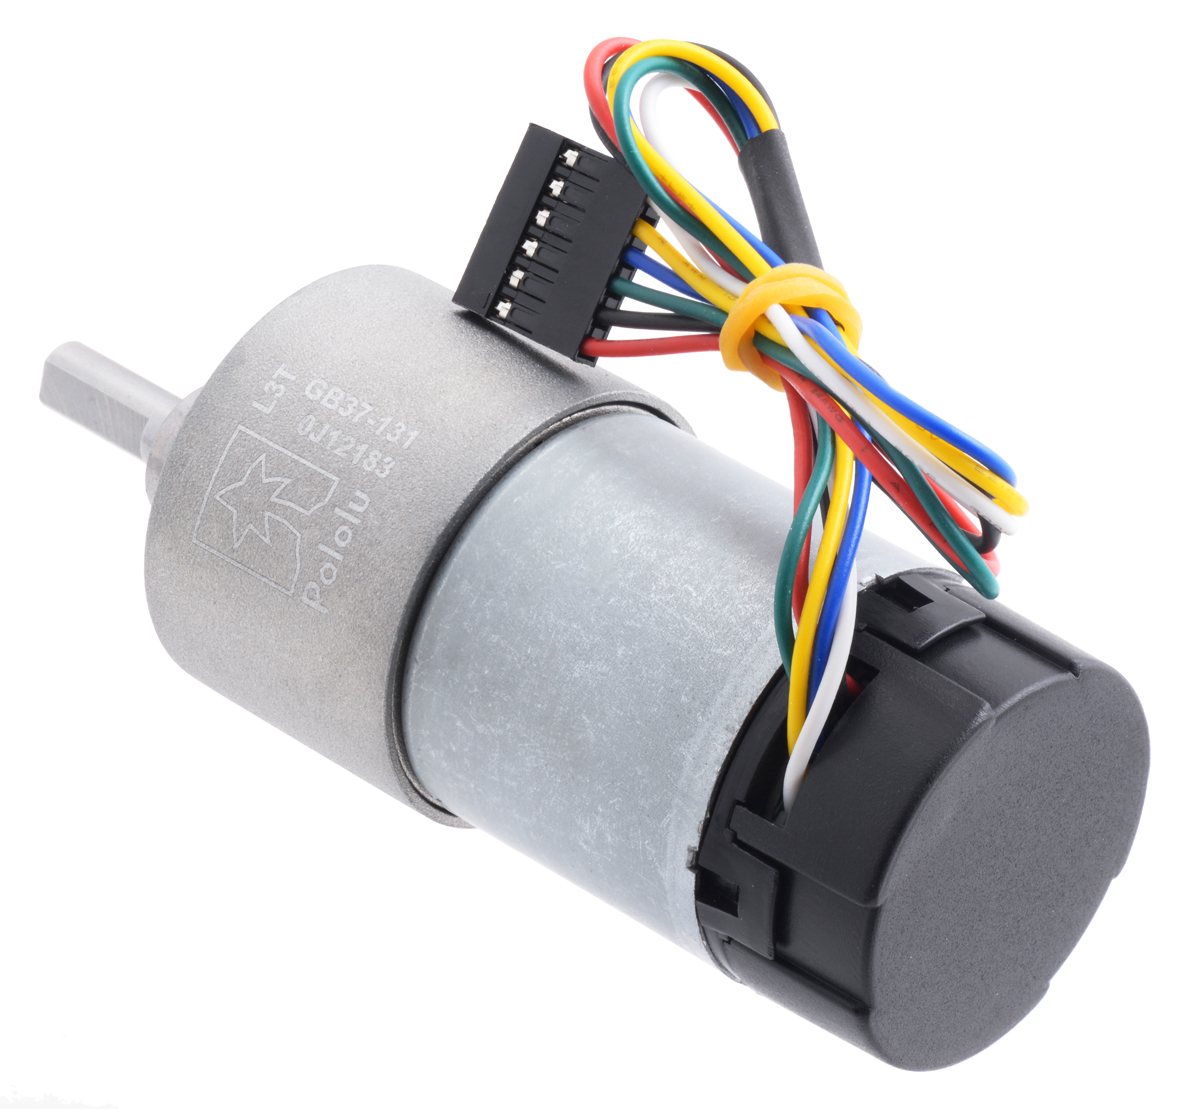 131:1 Metal Gearmotor 37Dx73L mm 12V with 64 CPR Encoder (Helical Pinion)